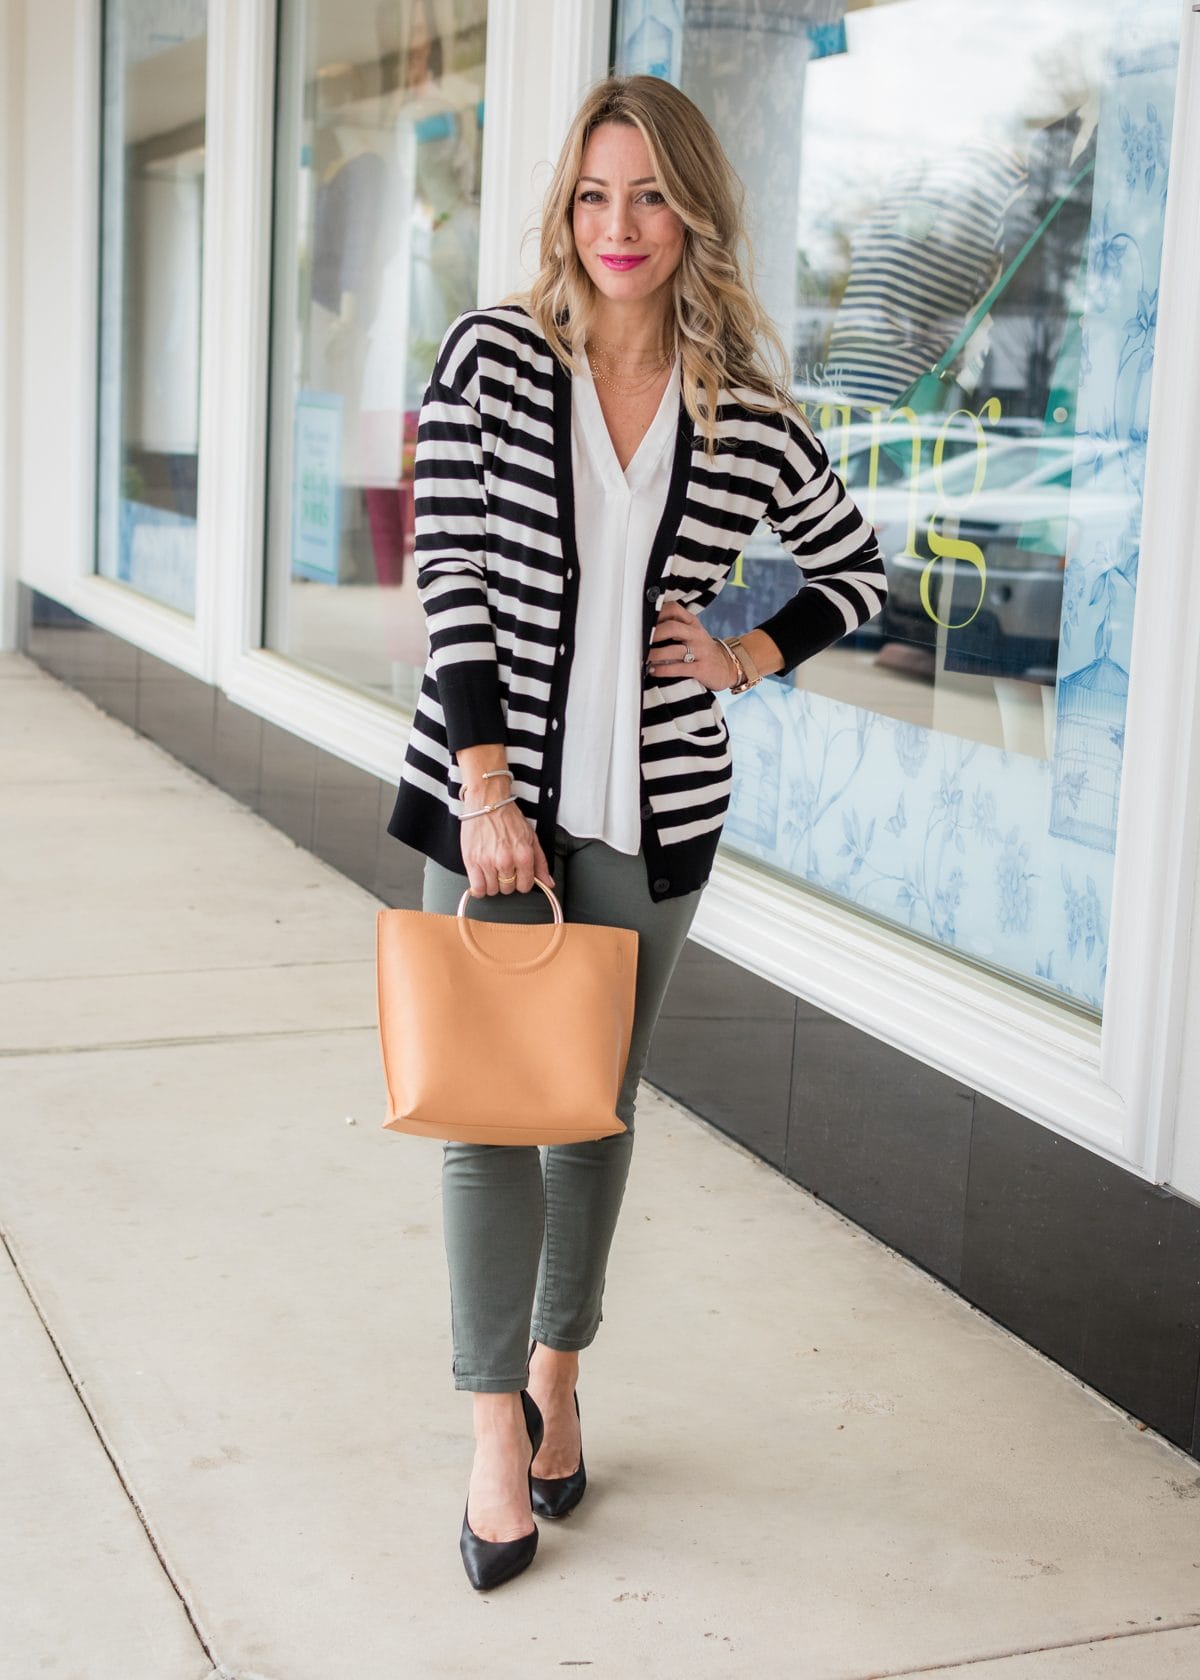 Skimmer Jeans and striped cardigan-1-3Skimmer Jeans and striped cardigan-1-3